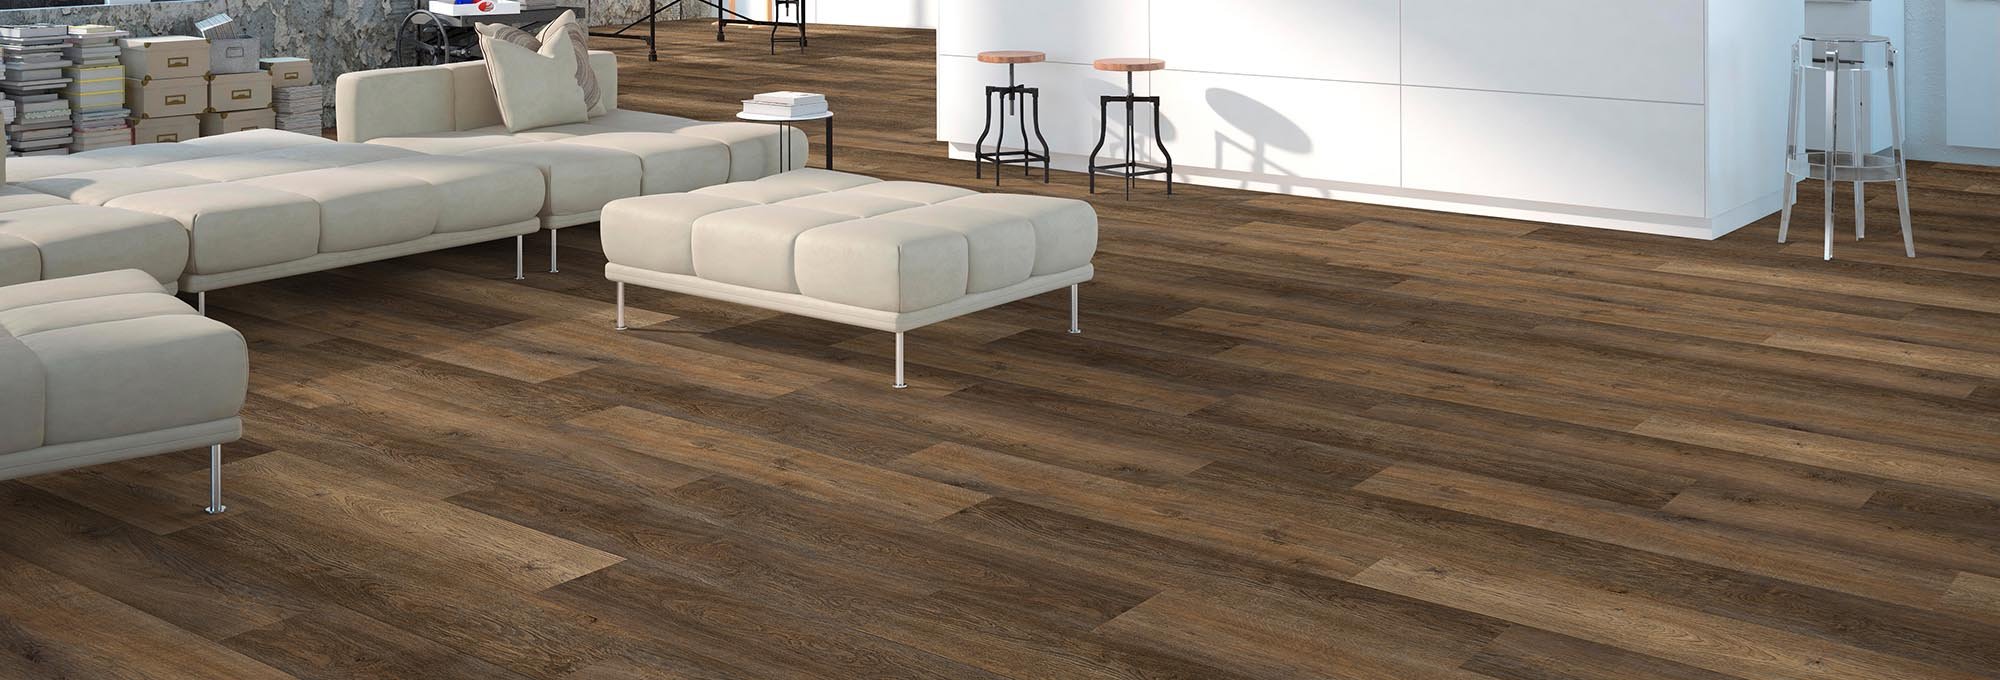 Shop Flooring Products from CarpetsPlus COLORTILE of Bloomington in Bloomington, IL